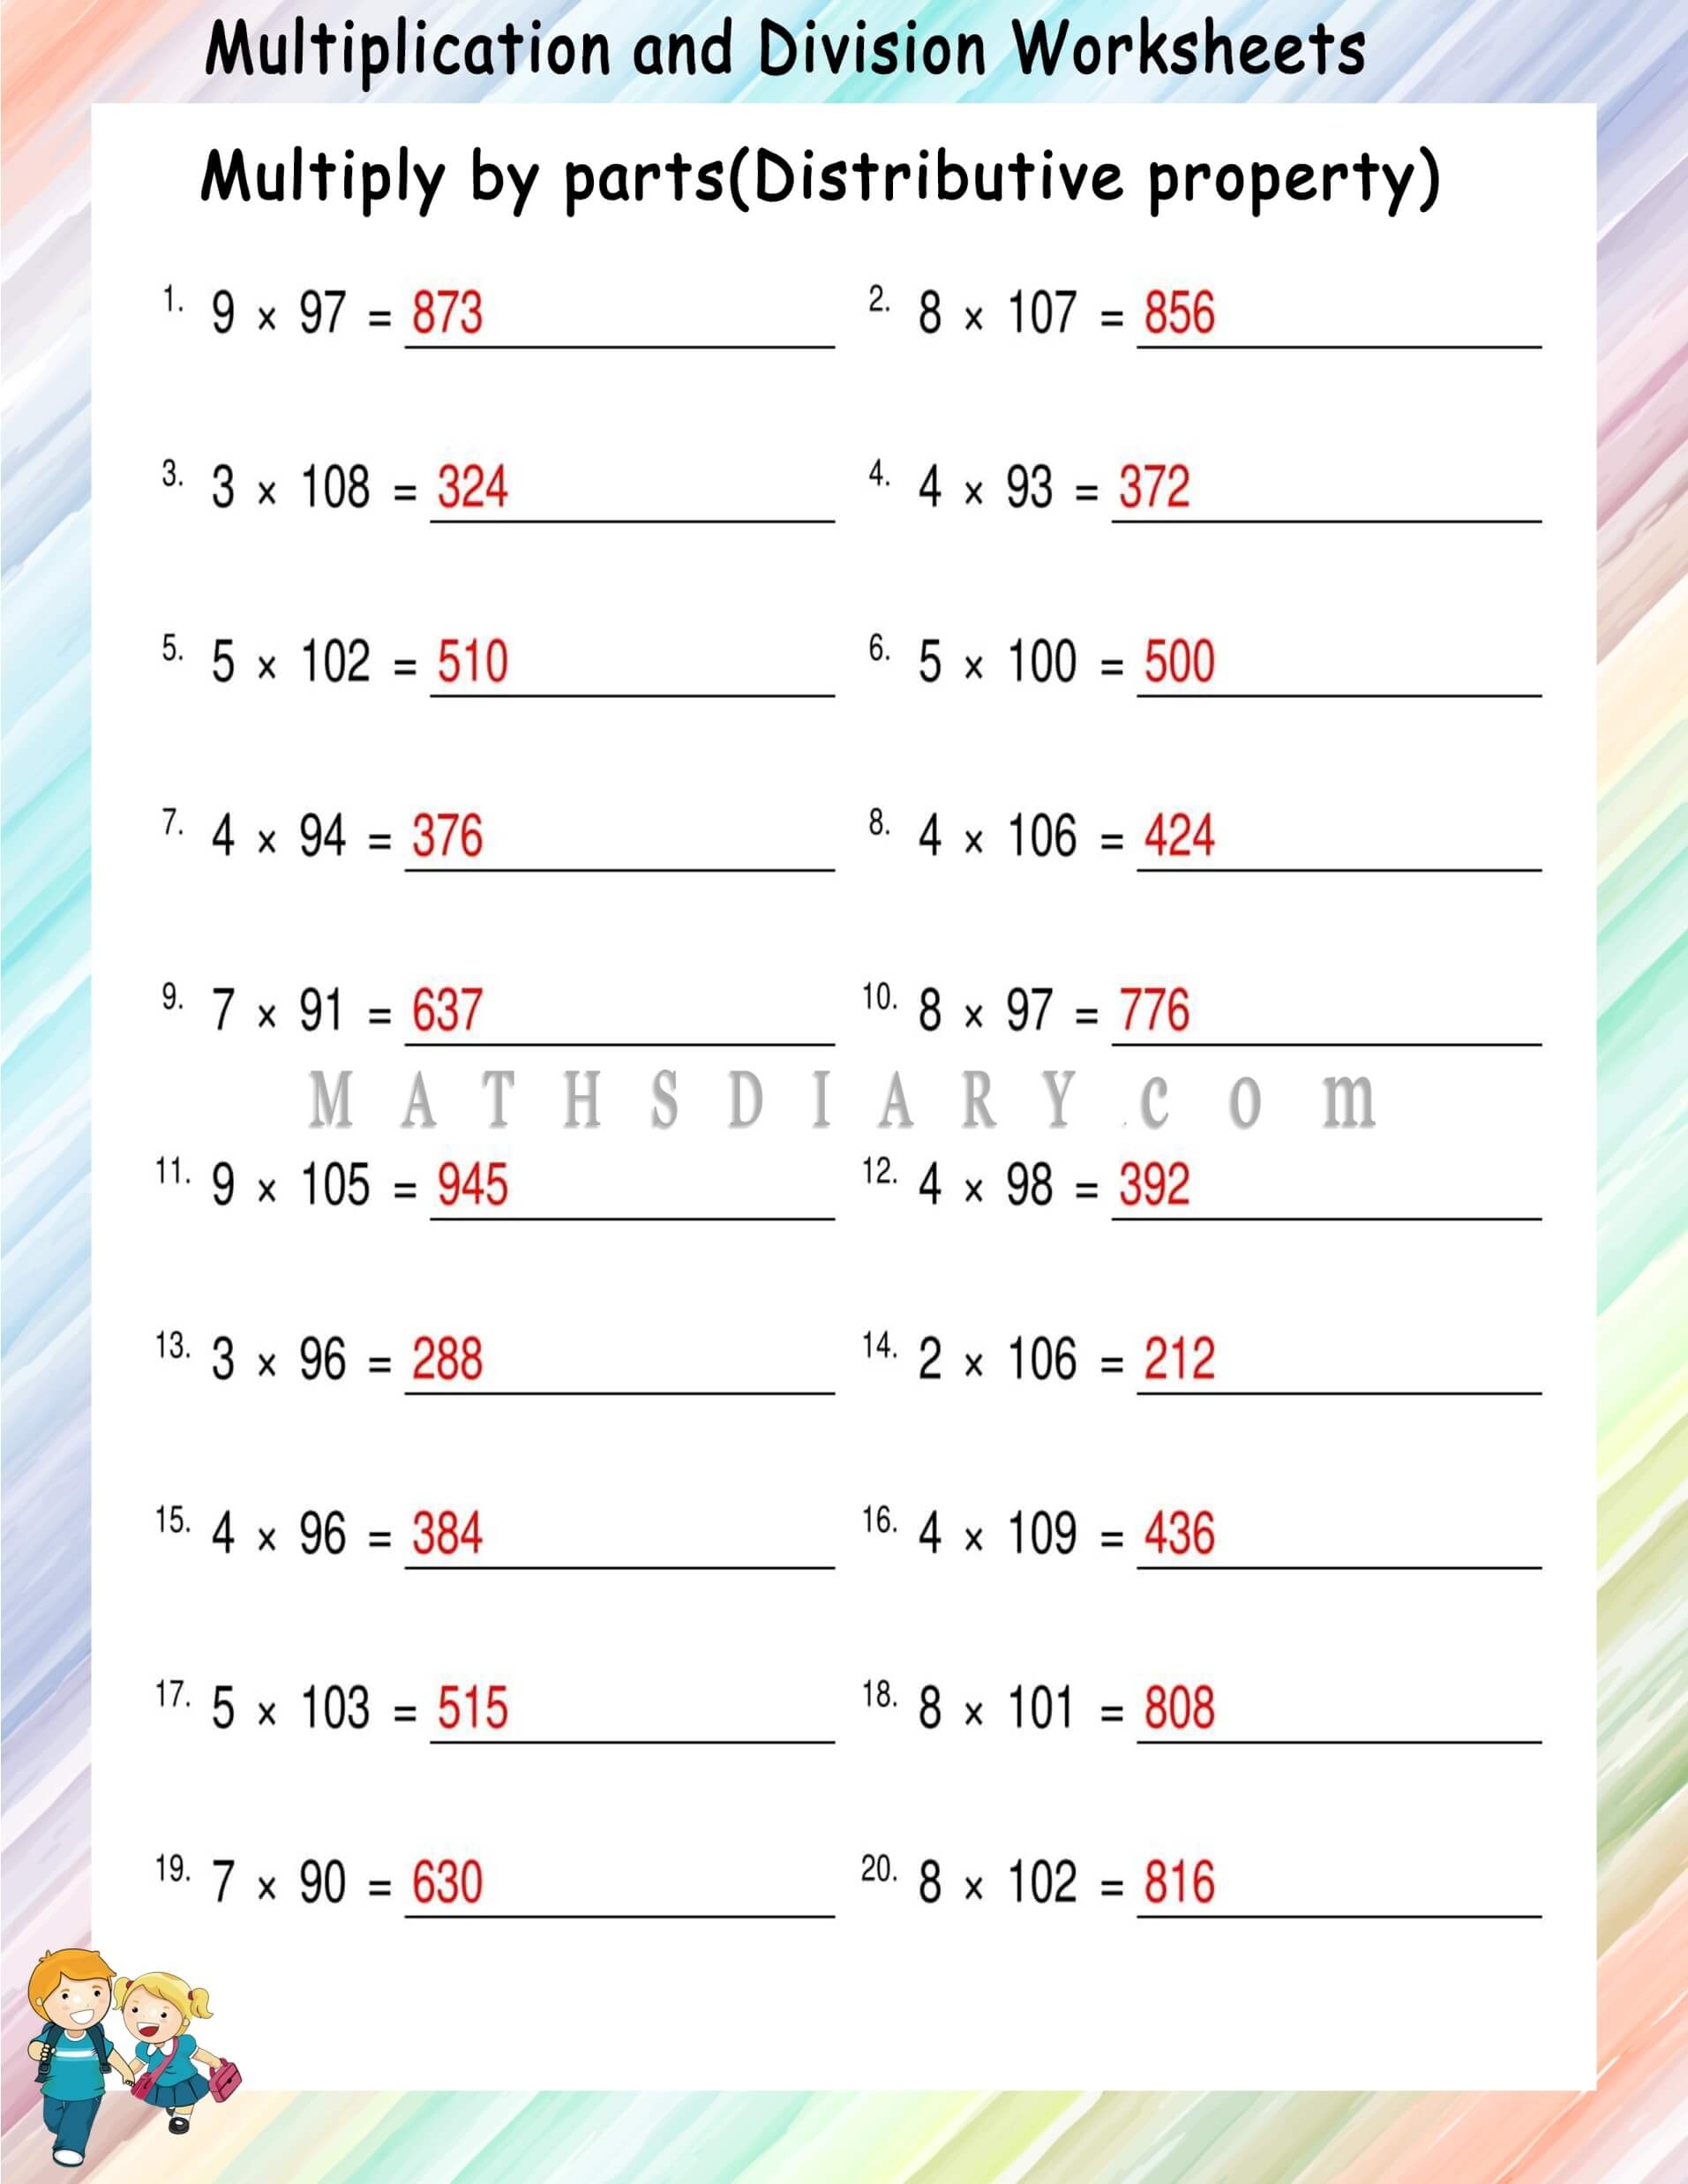 Multiplying By Parts Distributive Property Worksheets Math Worksheets MathsDiary